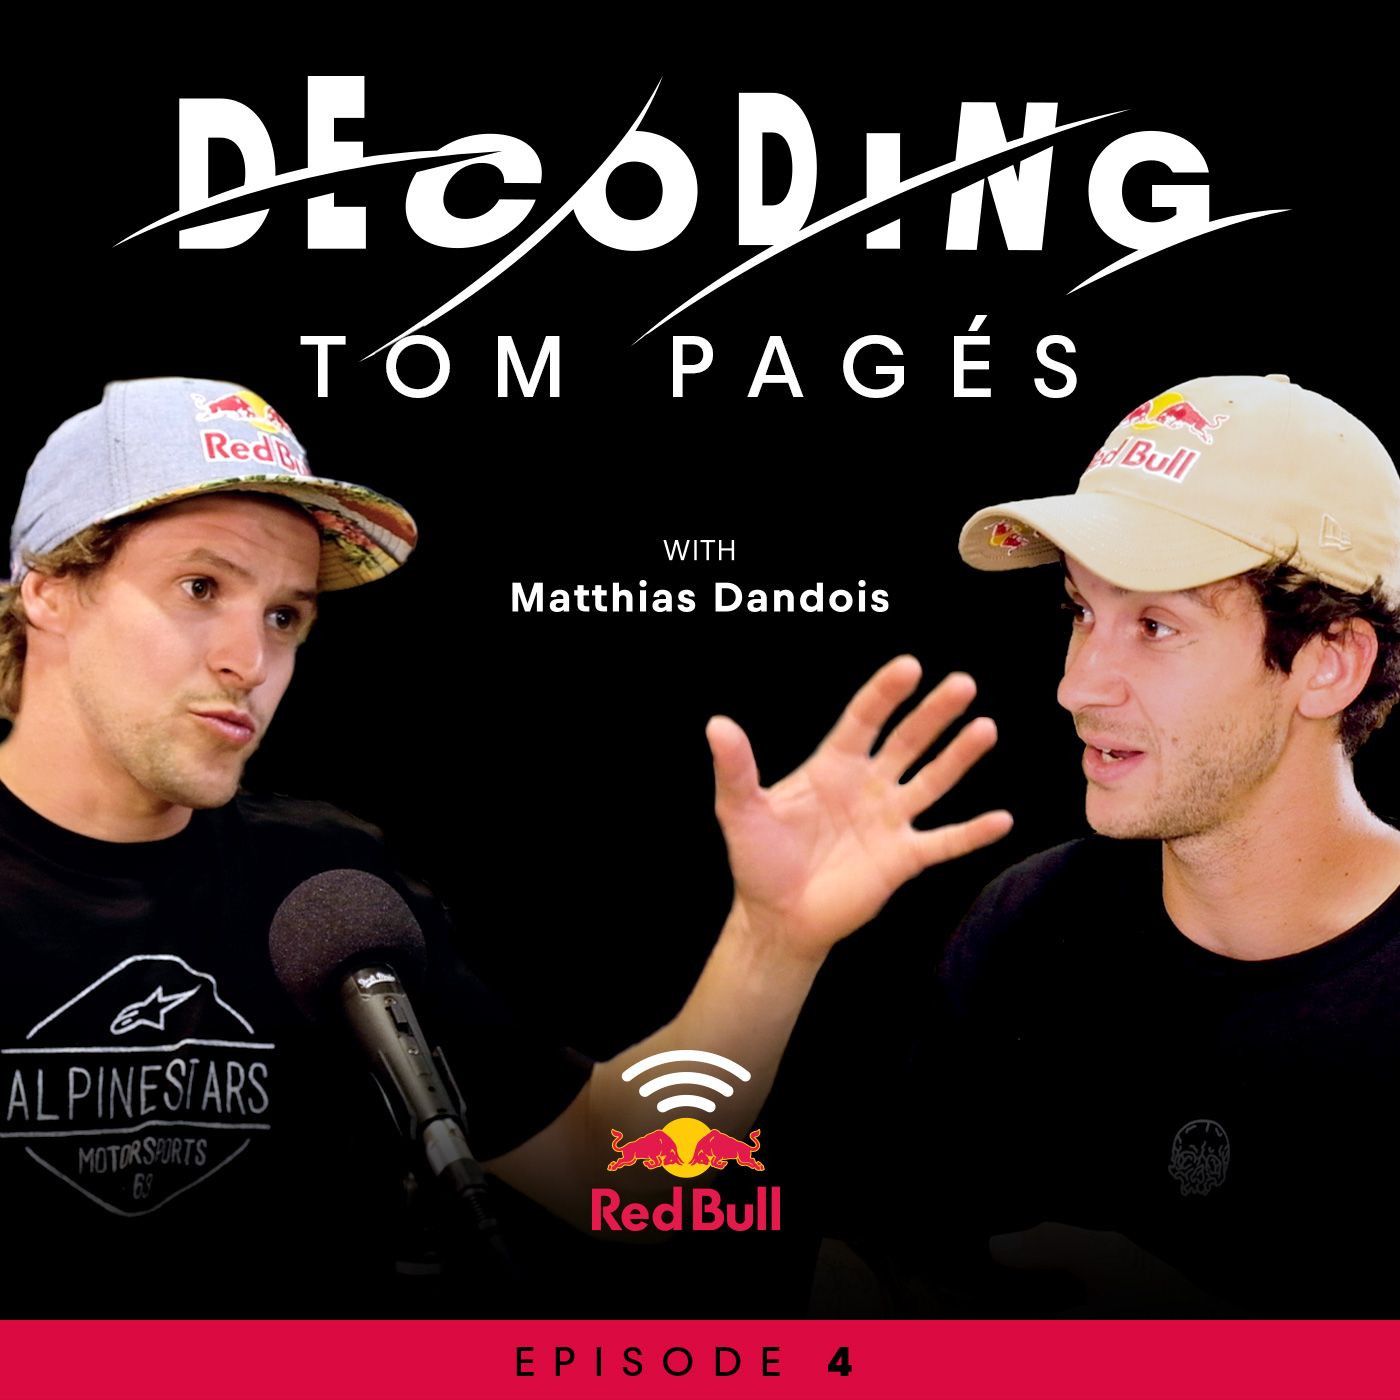 Tom Pagès – French Freestyle Motocross rider and multiple Red Bull X-Fighters winner, Series 1 Episode 4